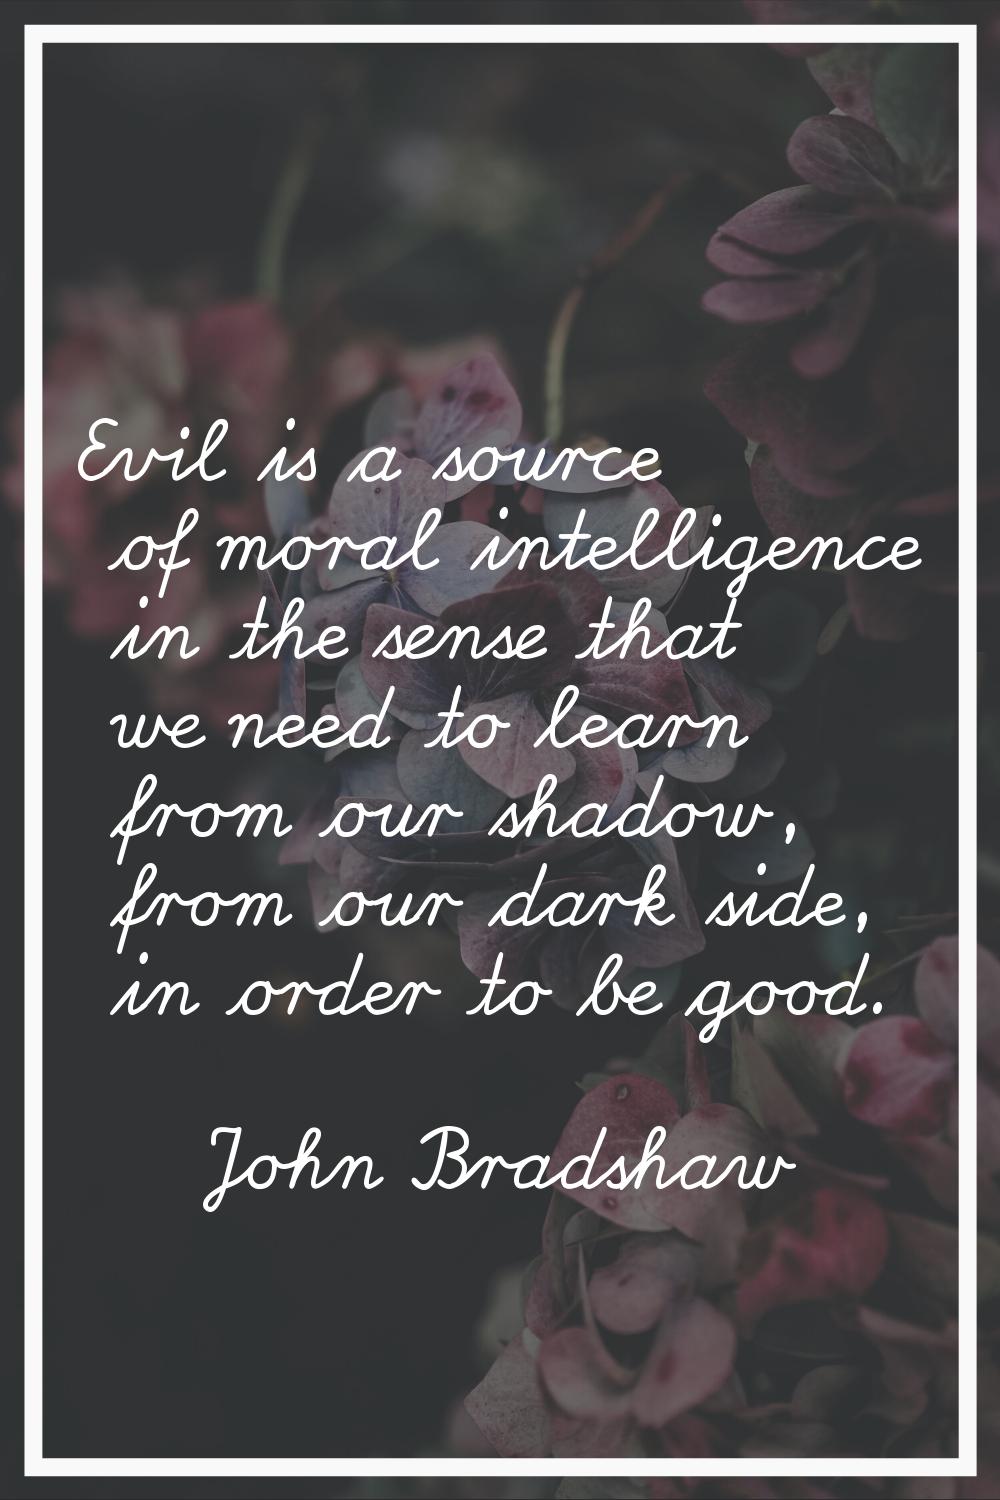 Evil is a source of moral intelligence in the sense that we need to learn from our shadow, from our